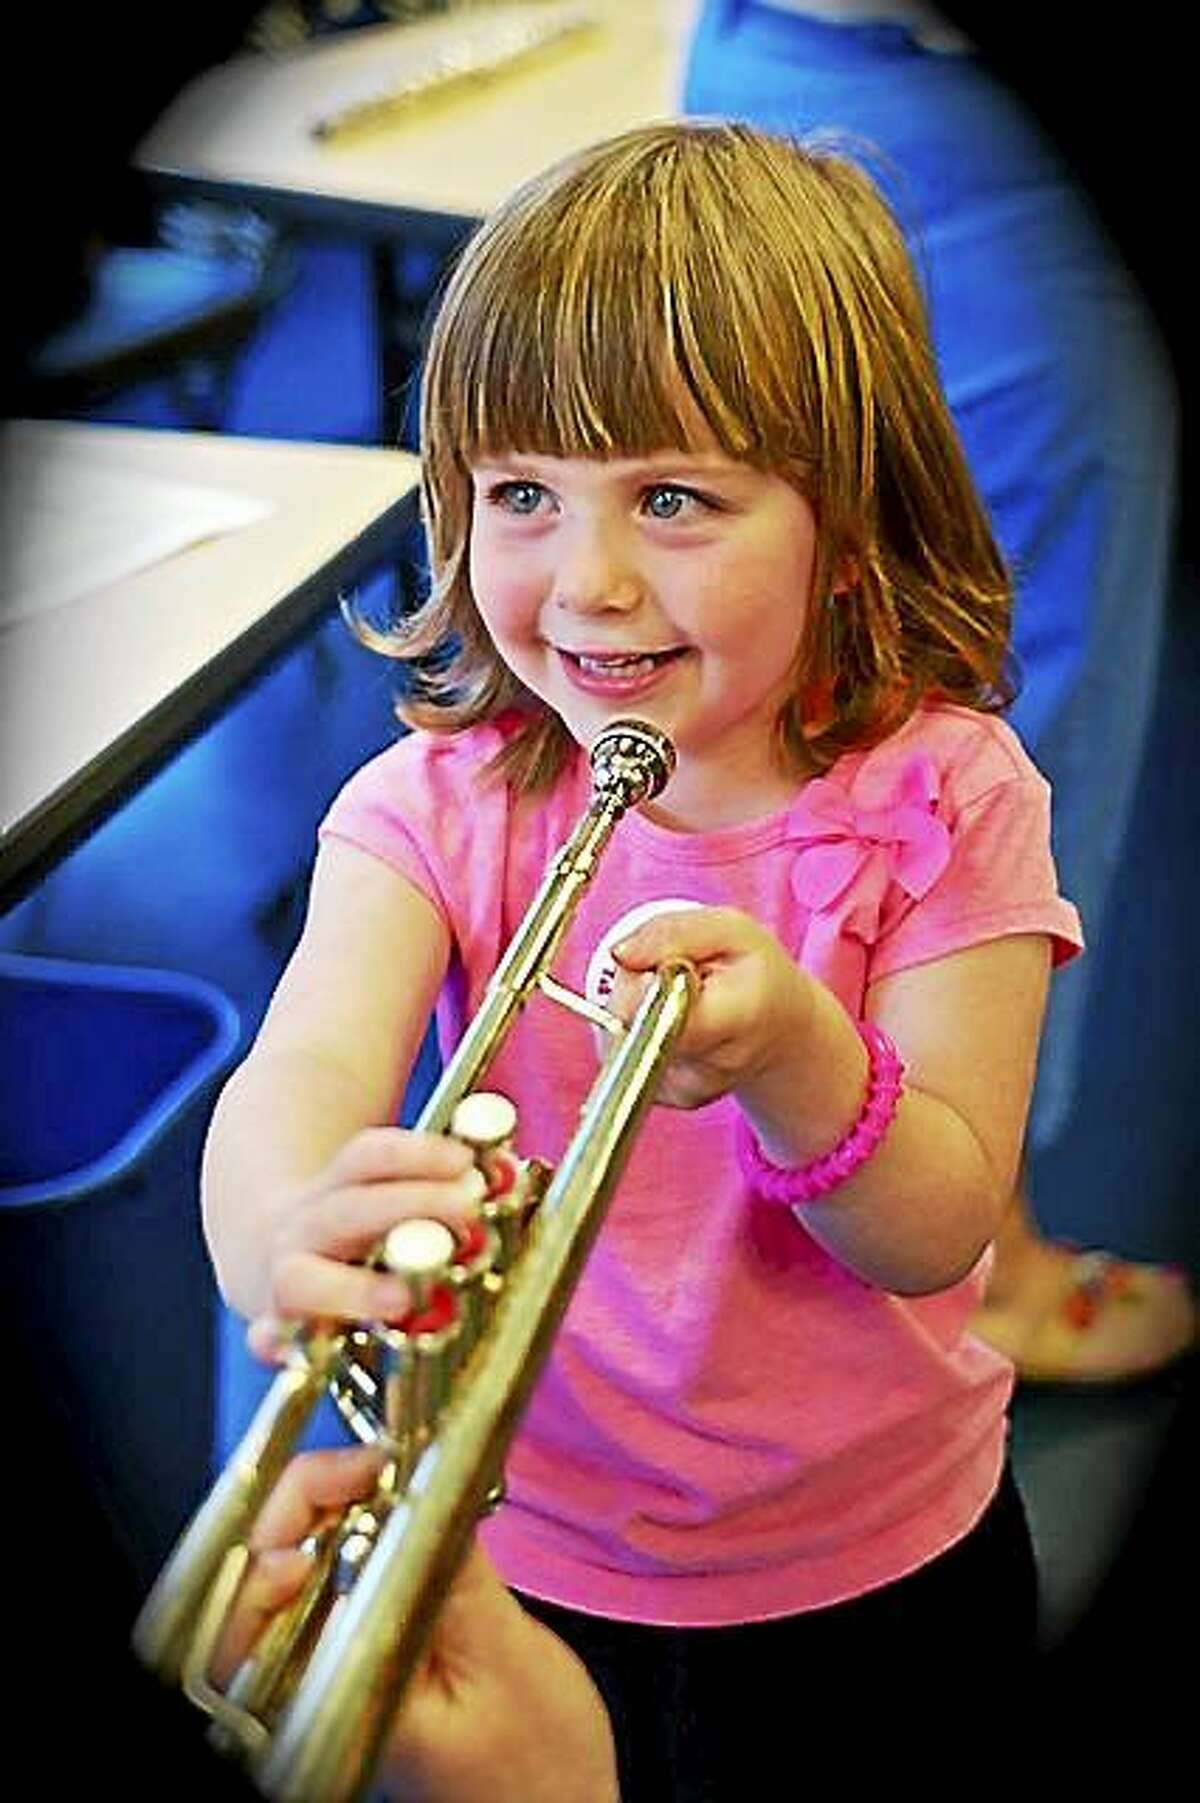 The instrument “petting zoo” will be part of the festivities Saturday.